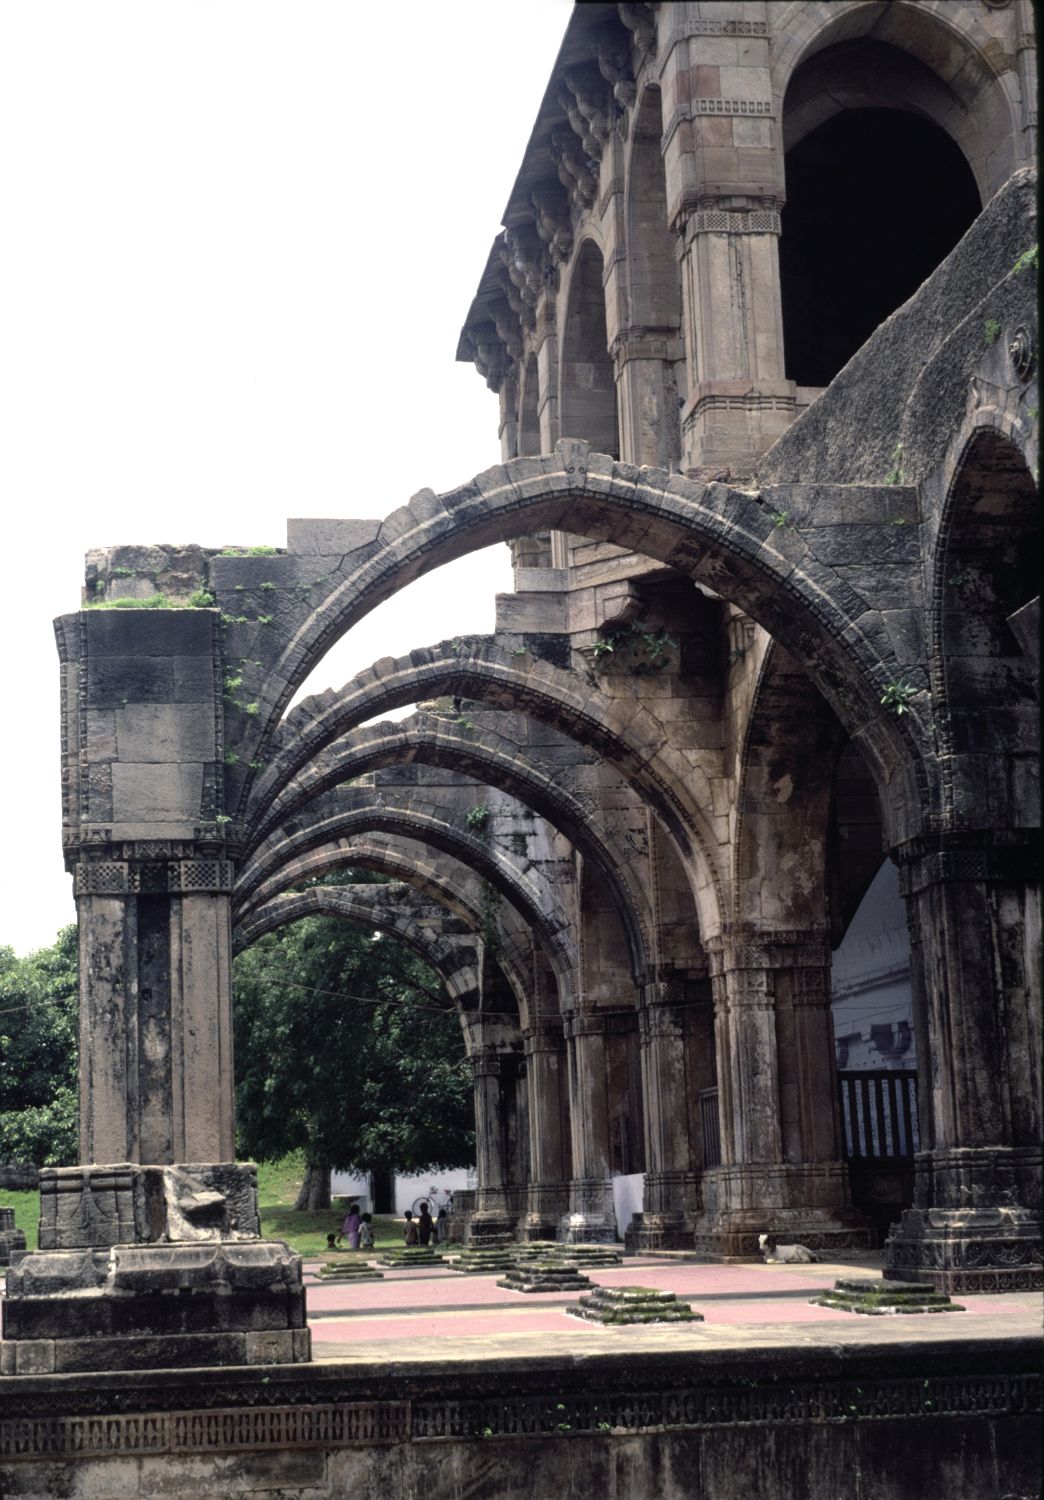 Qutb-i Alam Tomb: exterior view showing arcade of ambulatory surrounding central domed chamber.